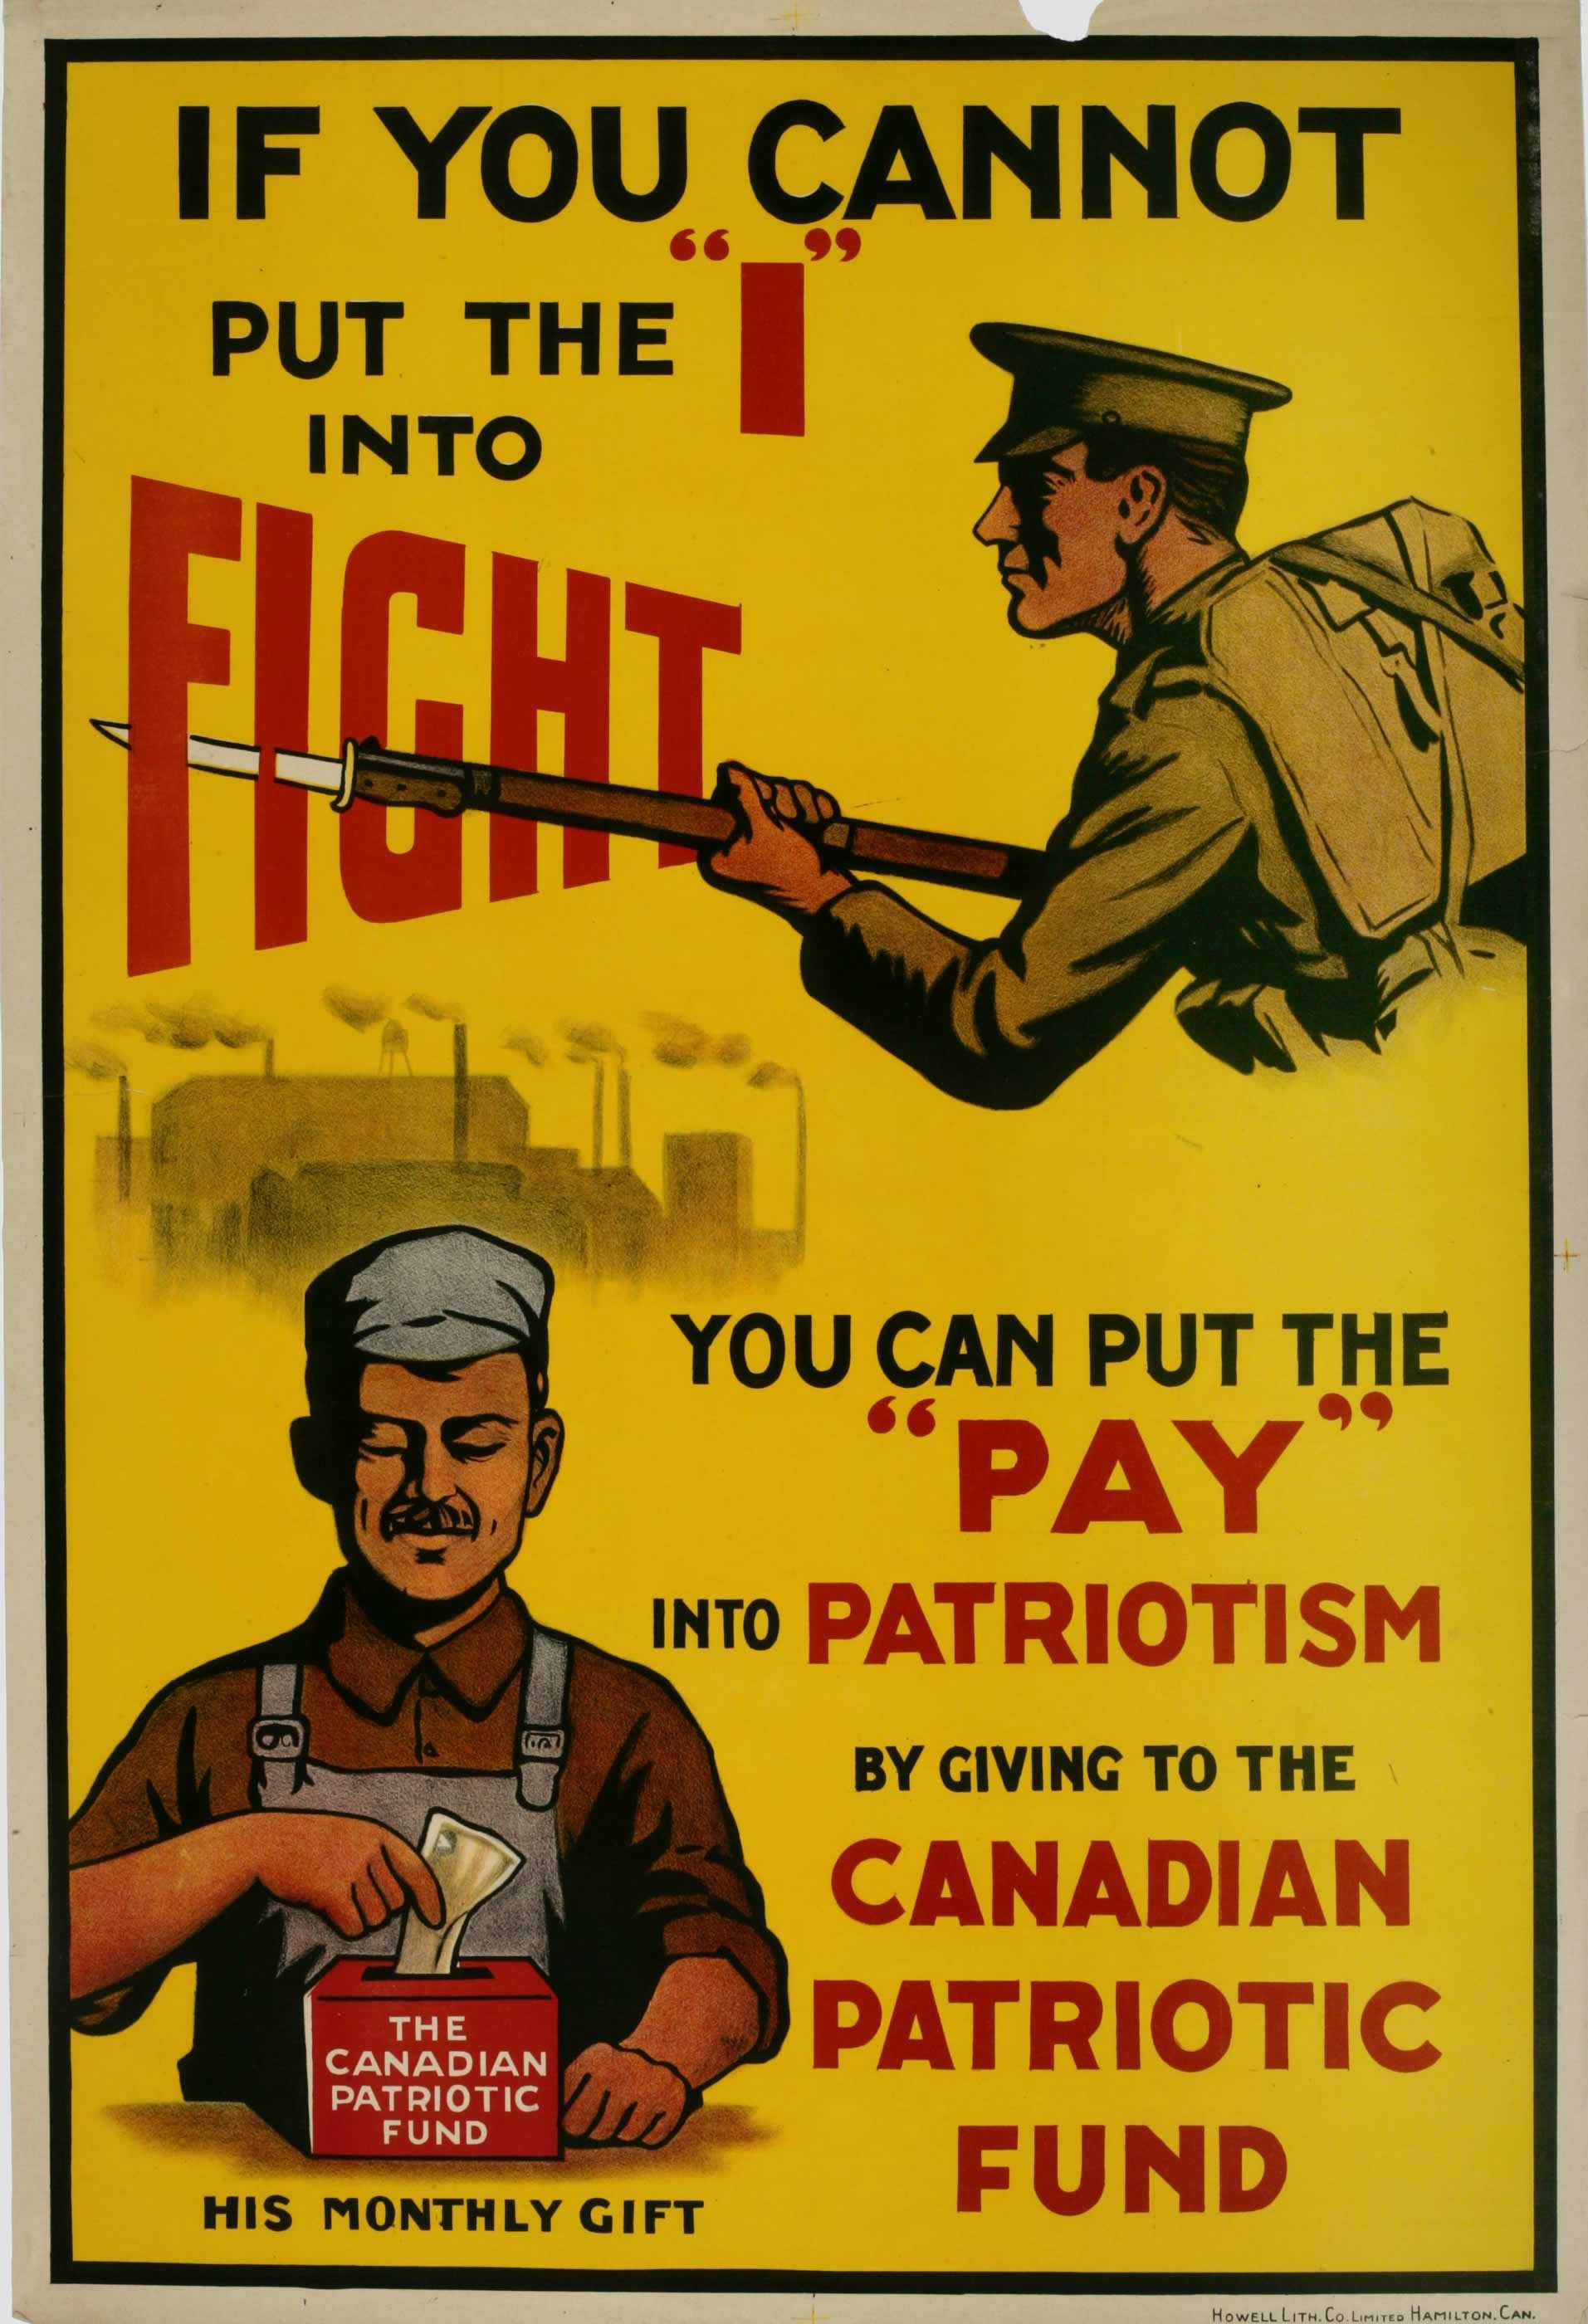 Illustrated poster, colour. Top half: A soldier is shown pointing a gun with a bayonet. Bottom half: A man in factory clothing is shown putting money into a box labelled "The Canadian Patriotic Fund."